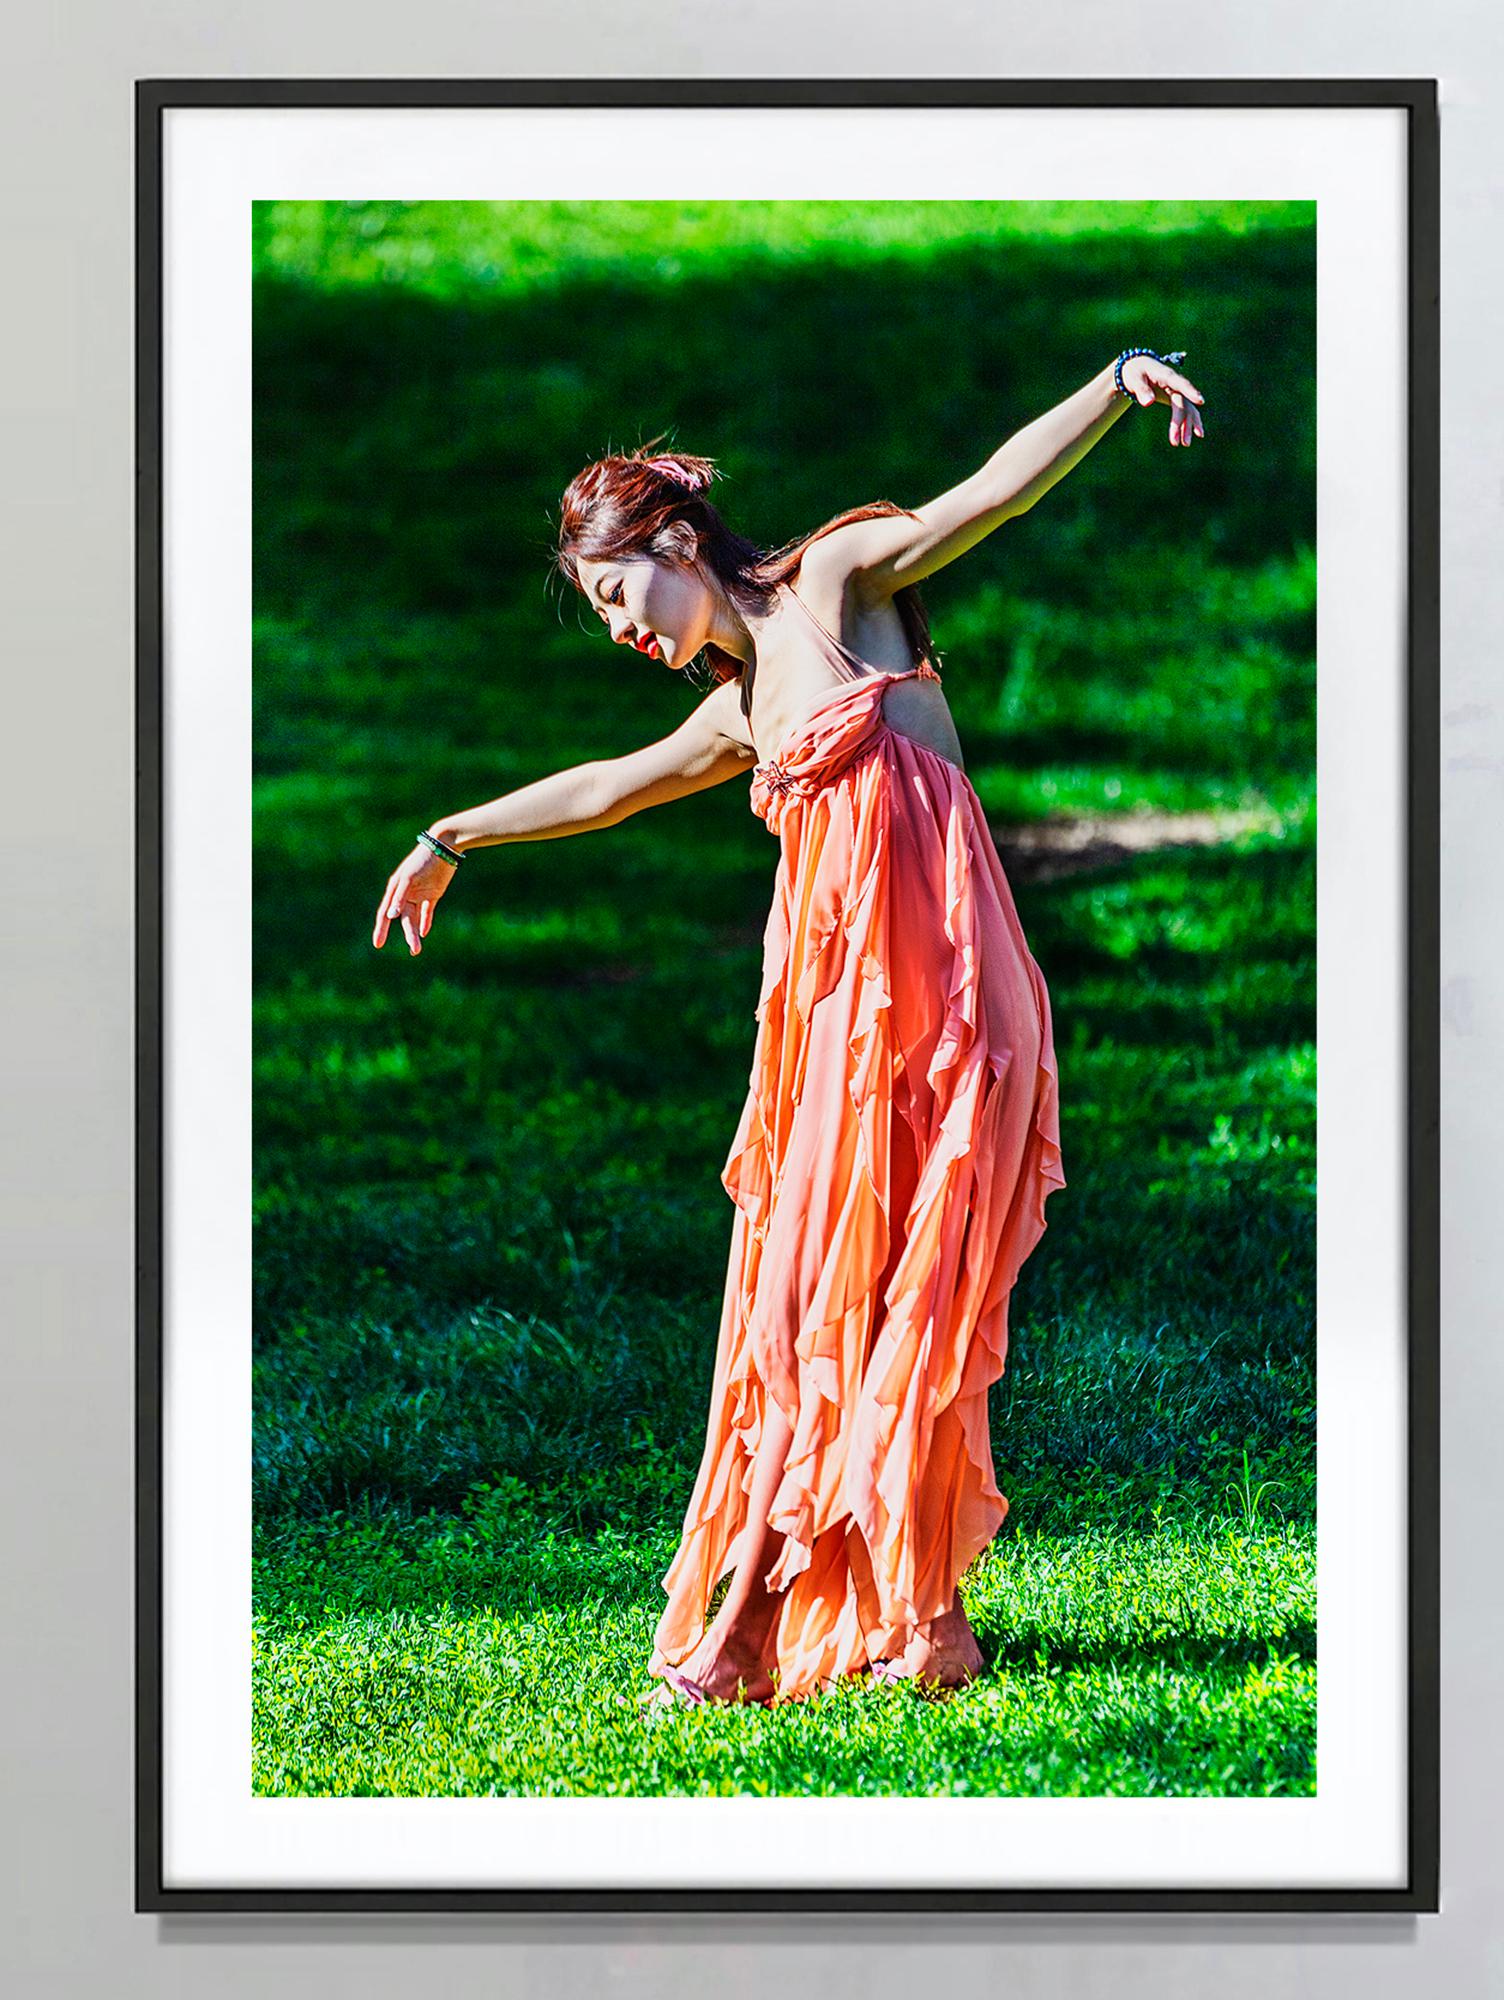 Free Spirited Asian Female Dancing Outdoors against Green Background - Photograph by Mitchell Funk